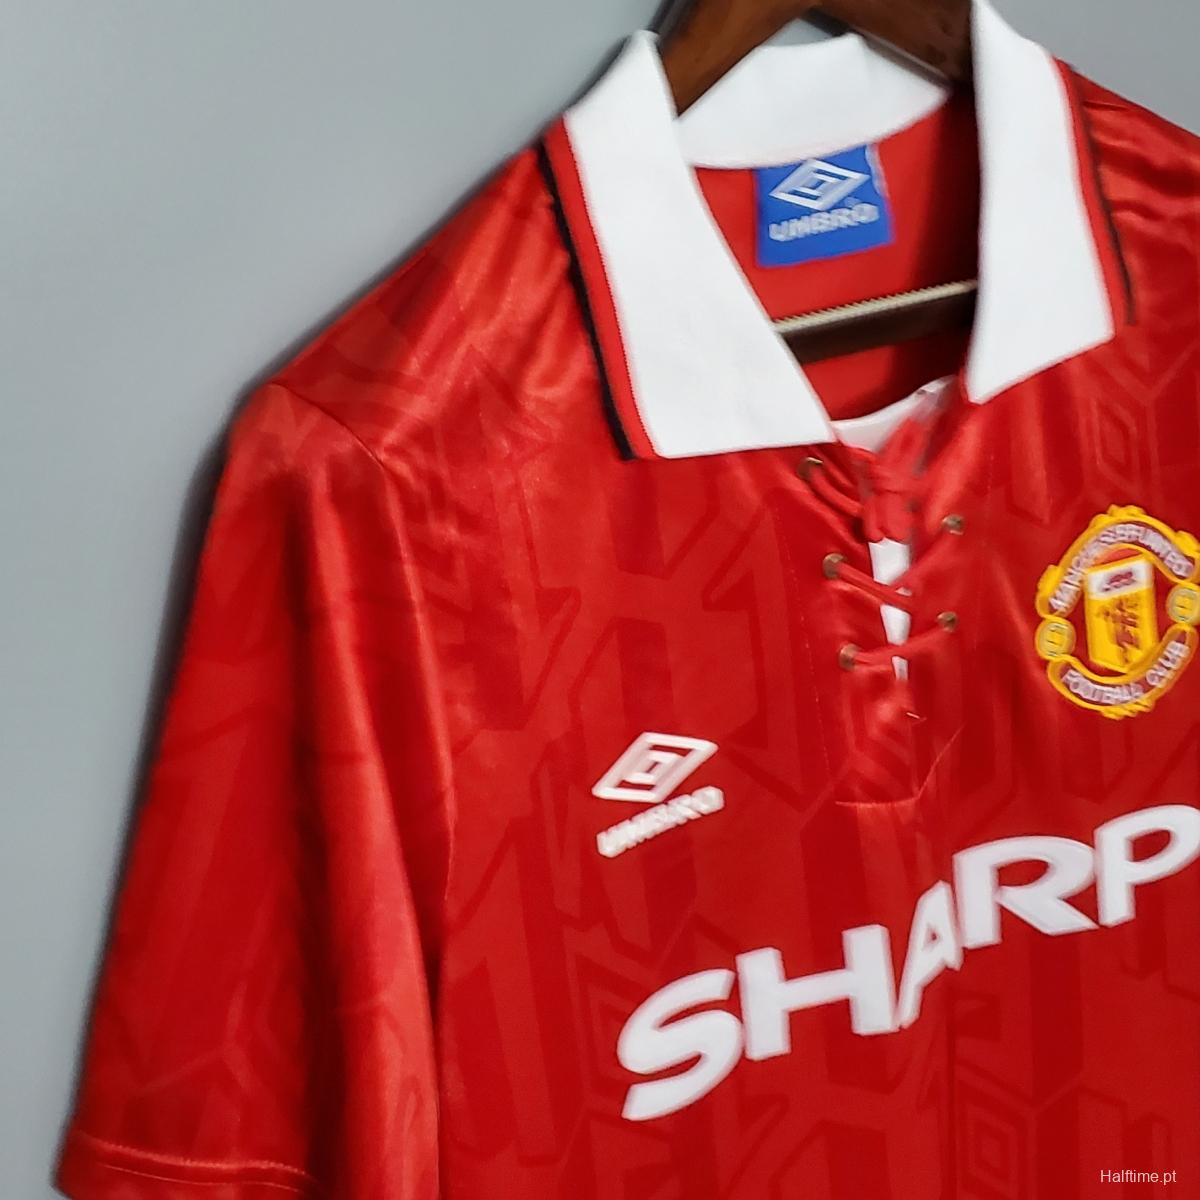 Retro 92/94 Manchester United home Soccer Jersey